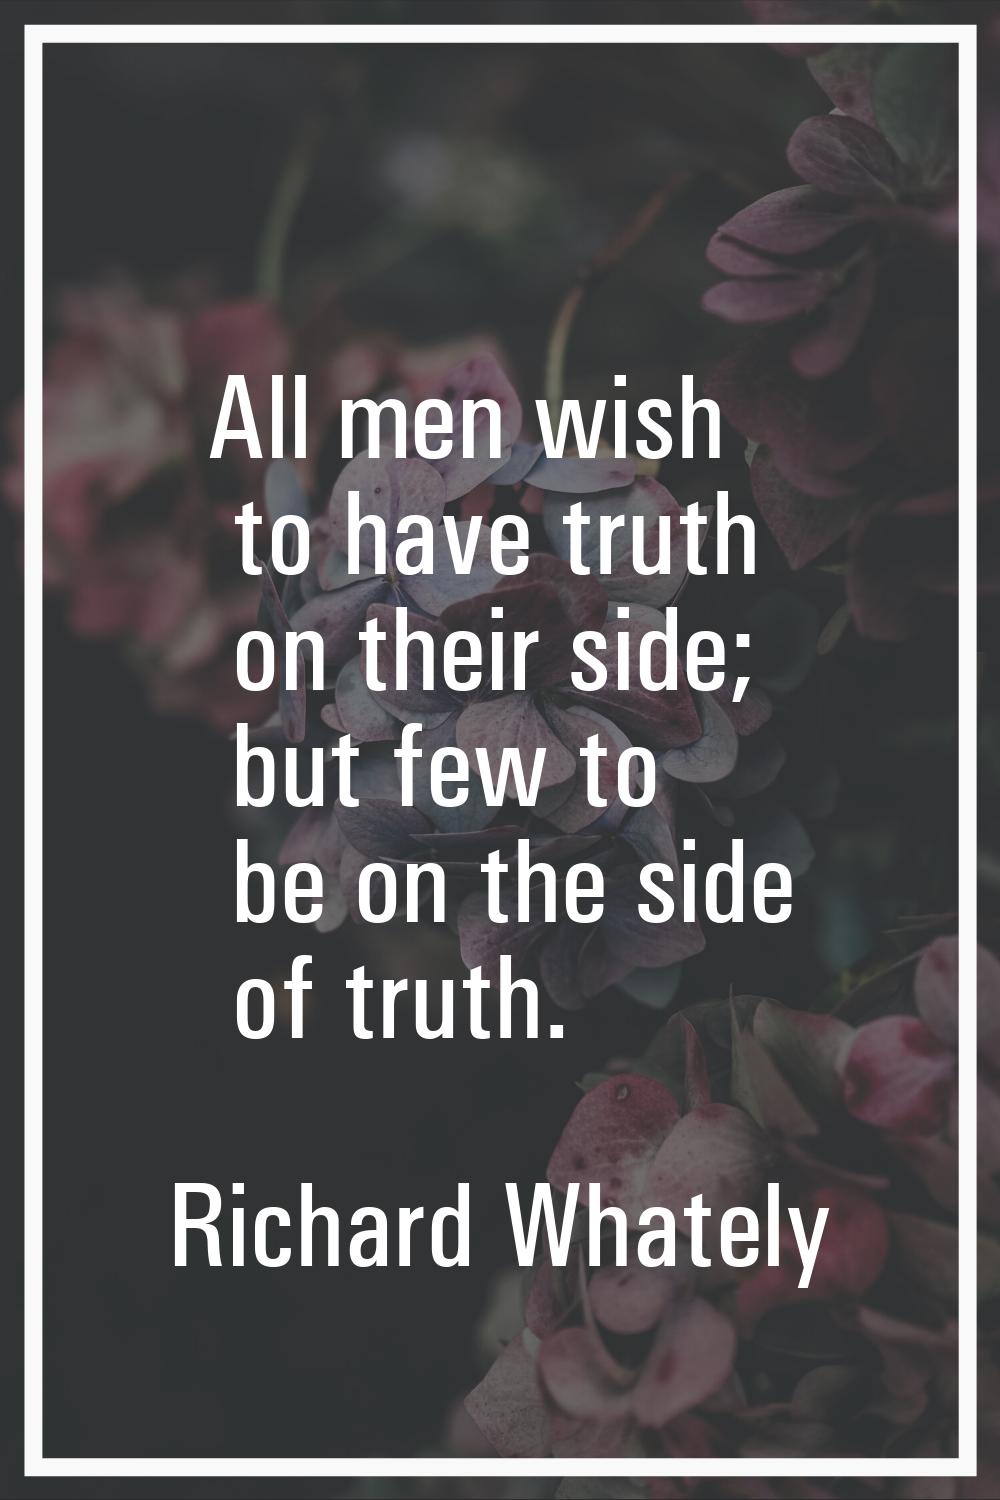 All men wish to have truth on their side; but few to be on the side of truth.